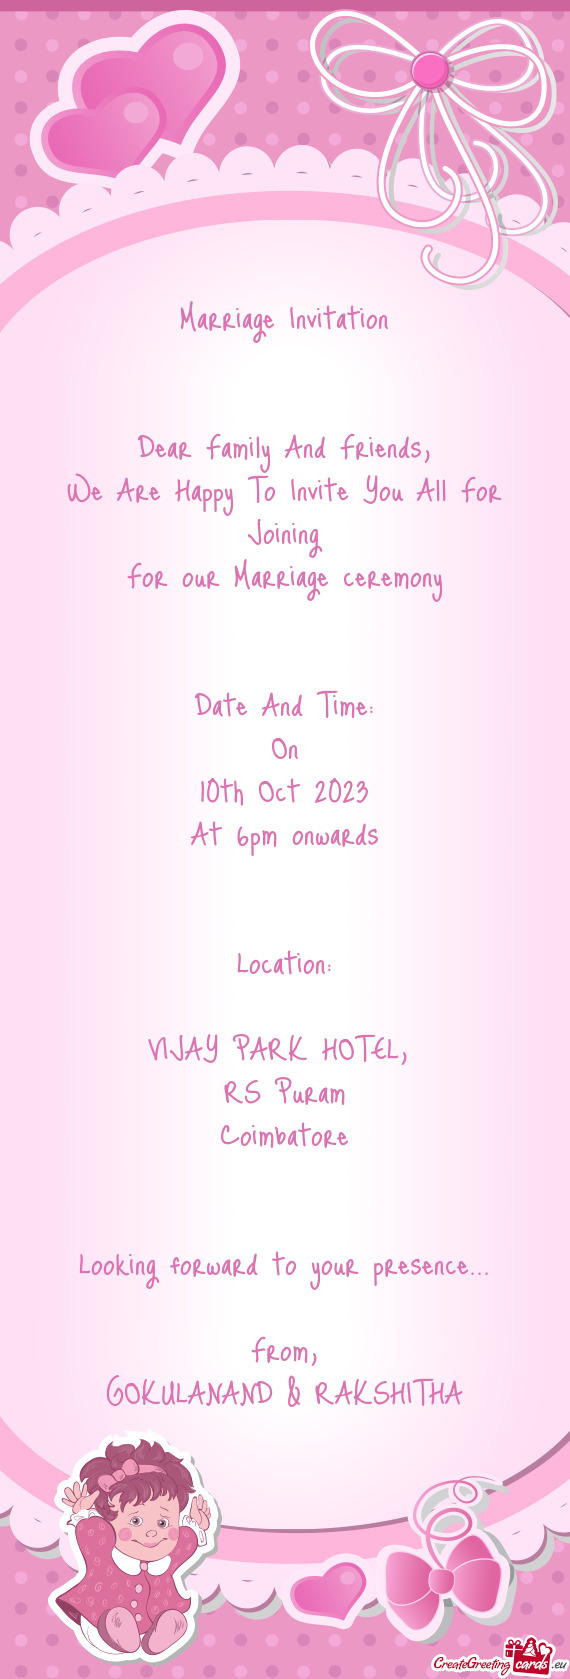 For our Marriage ceremony